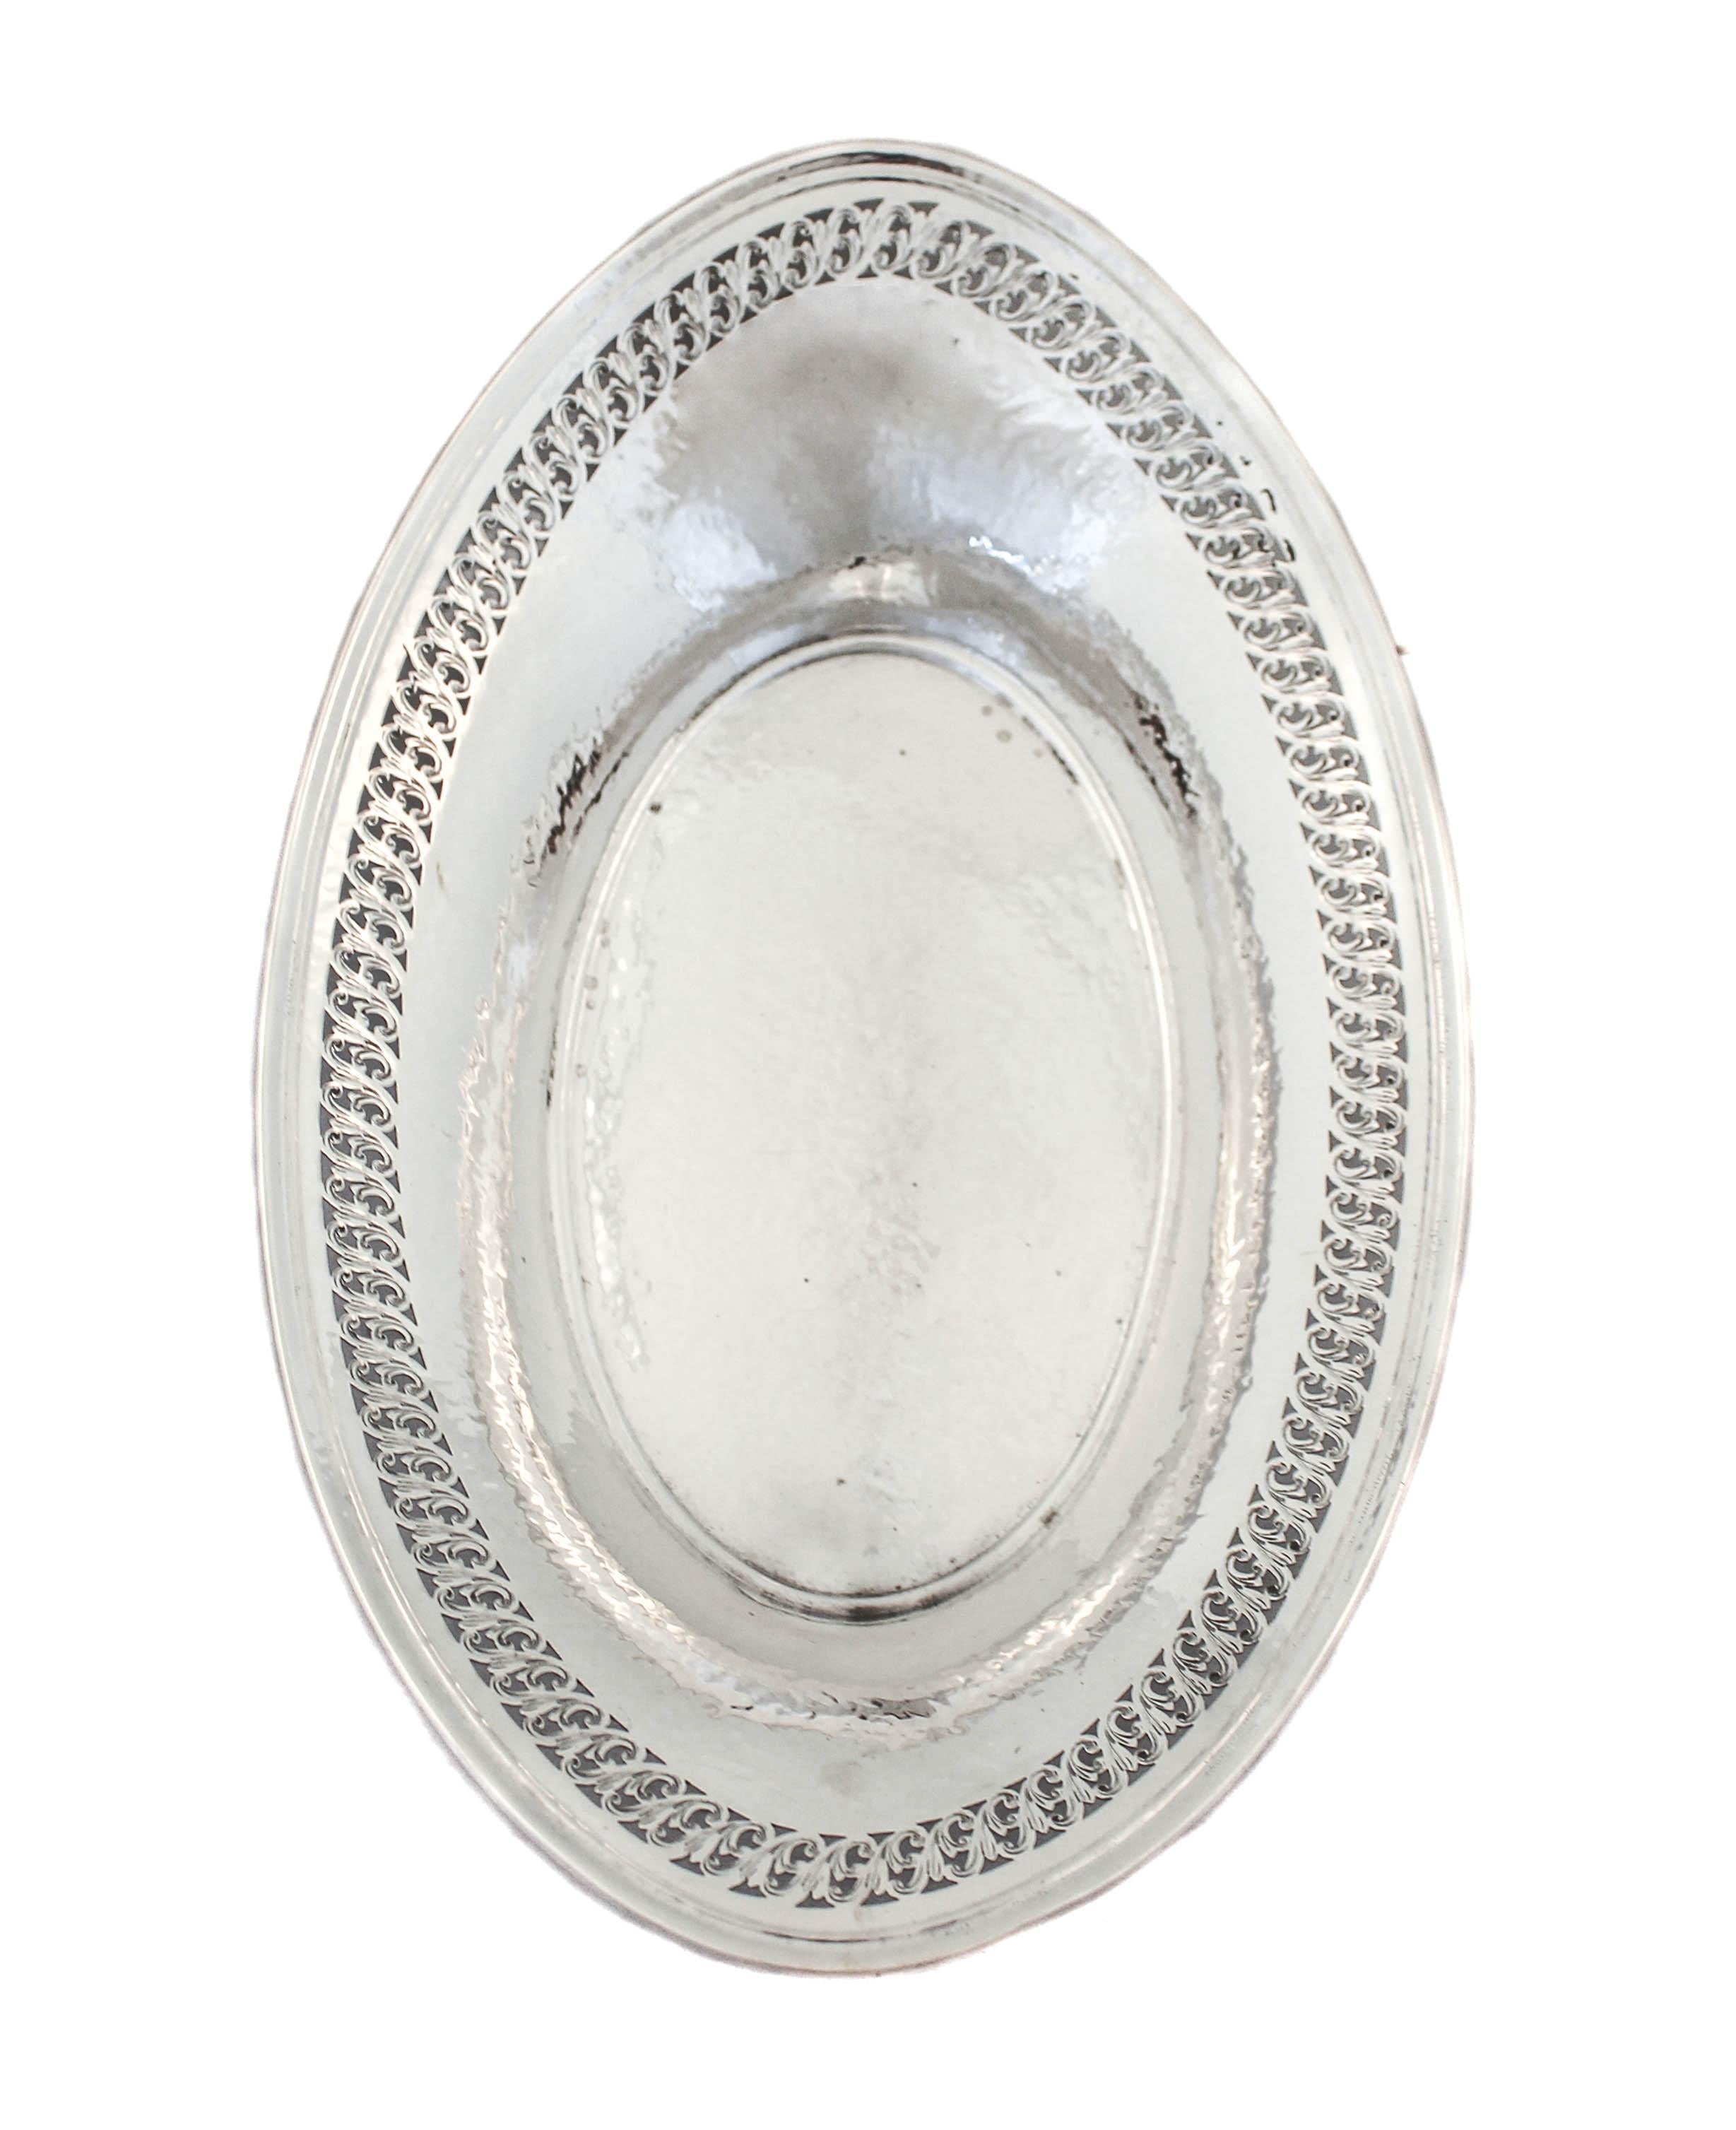 Being offered is a sterling silver breakfast by the Watson Silver Company. Hand hammered with an open-work swirl design around the edge; just enough decoration to give it personality. If you’re not using it for bread on your table, throw some